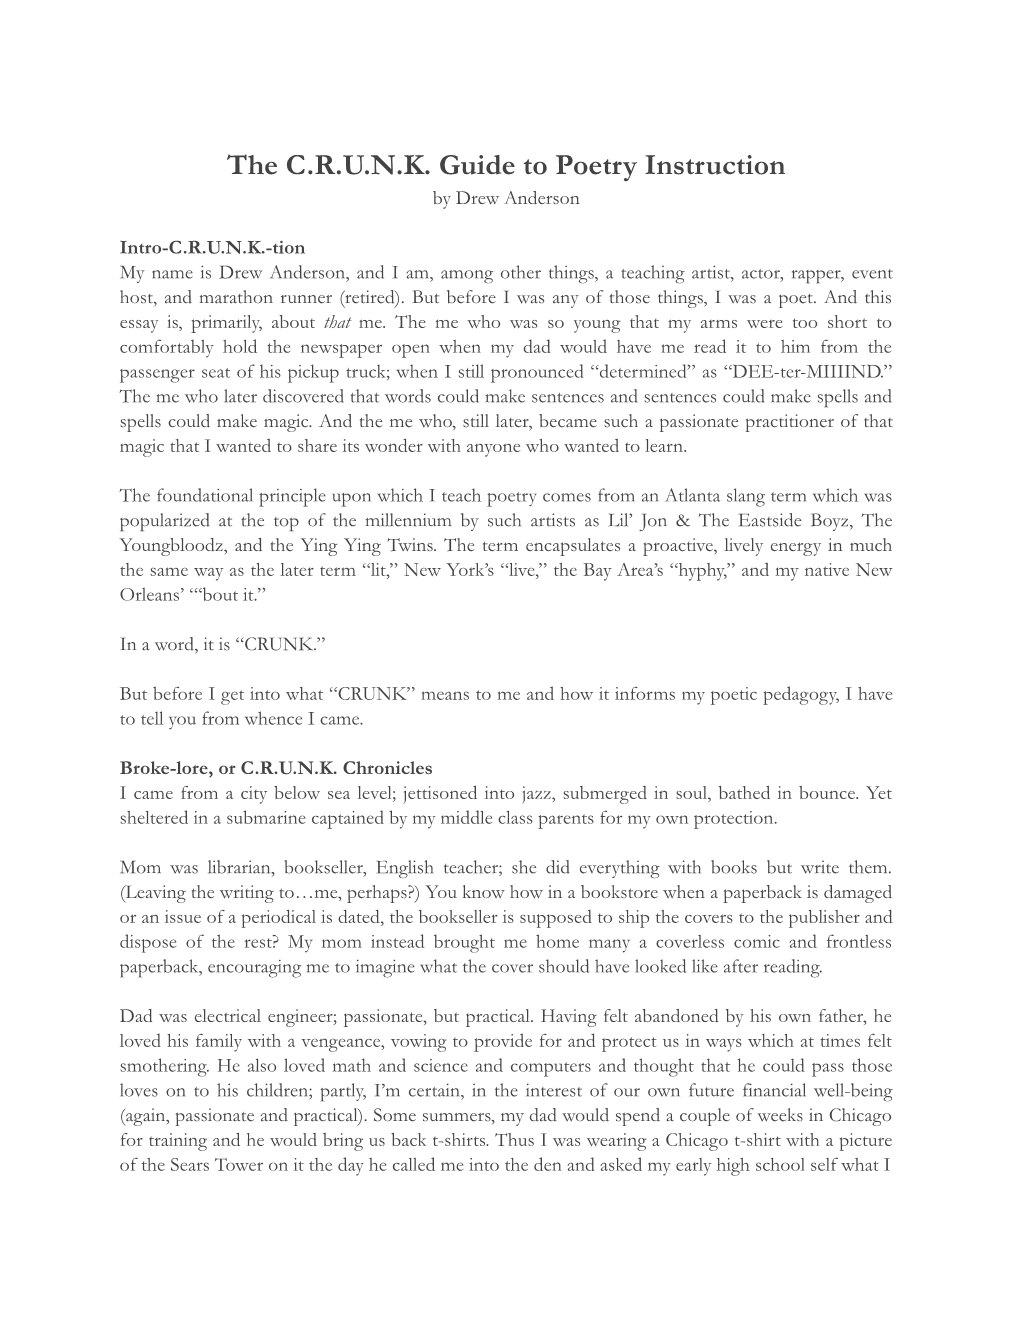 The C.R.U.N.K. Guide to Poetry Instruction by Drew Anderson